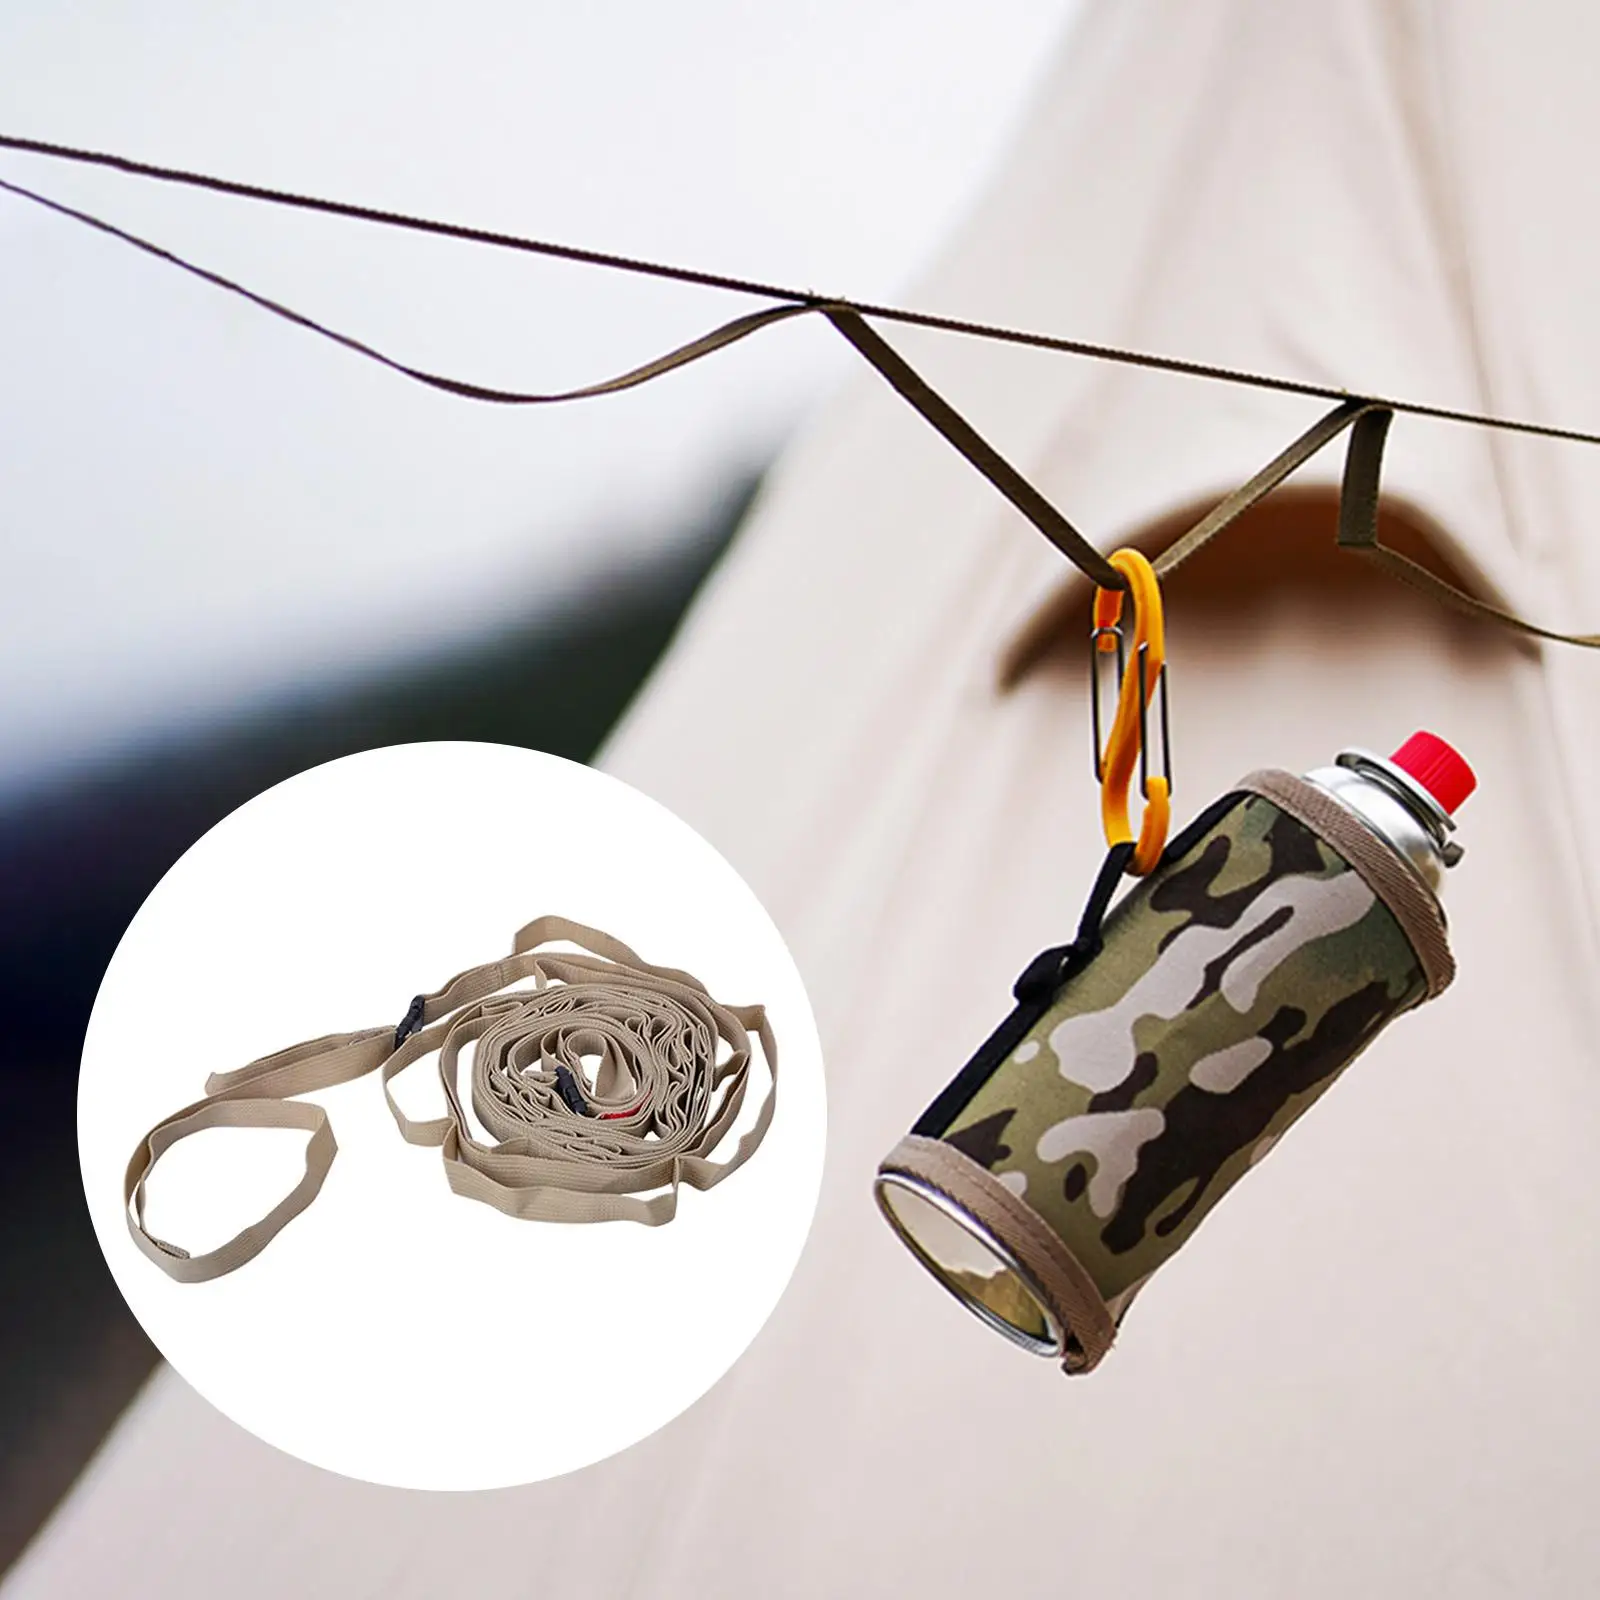 Outdoor Camping Lanyard Rope Campsite Storage Strap Tent Clothesline er ing Windproof  Cord Lanyard